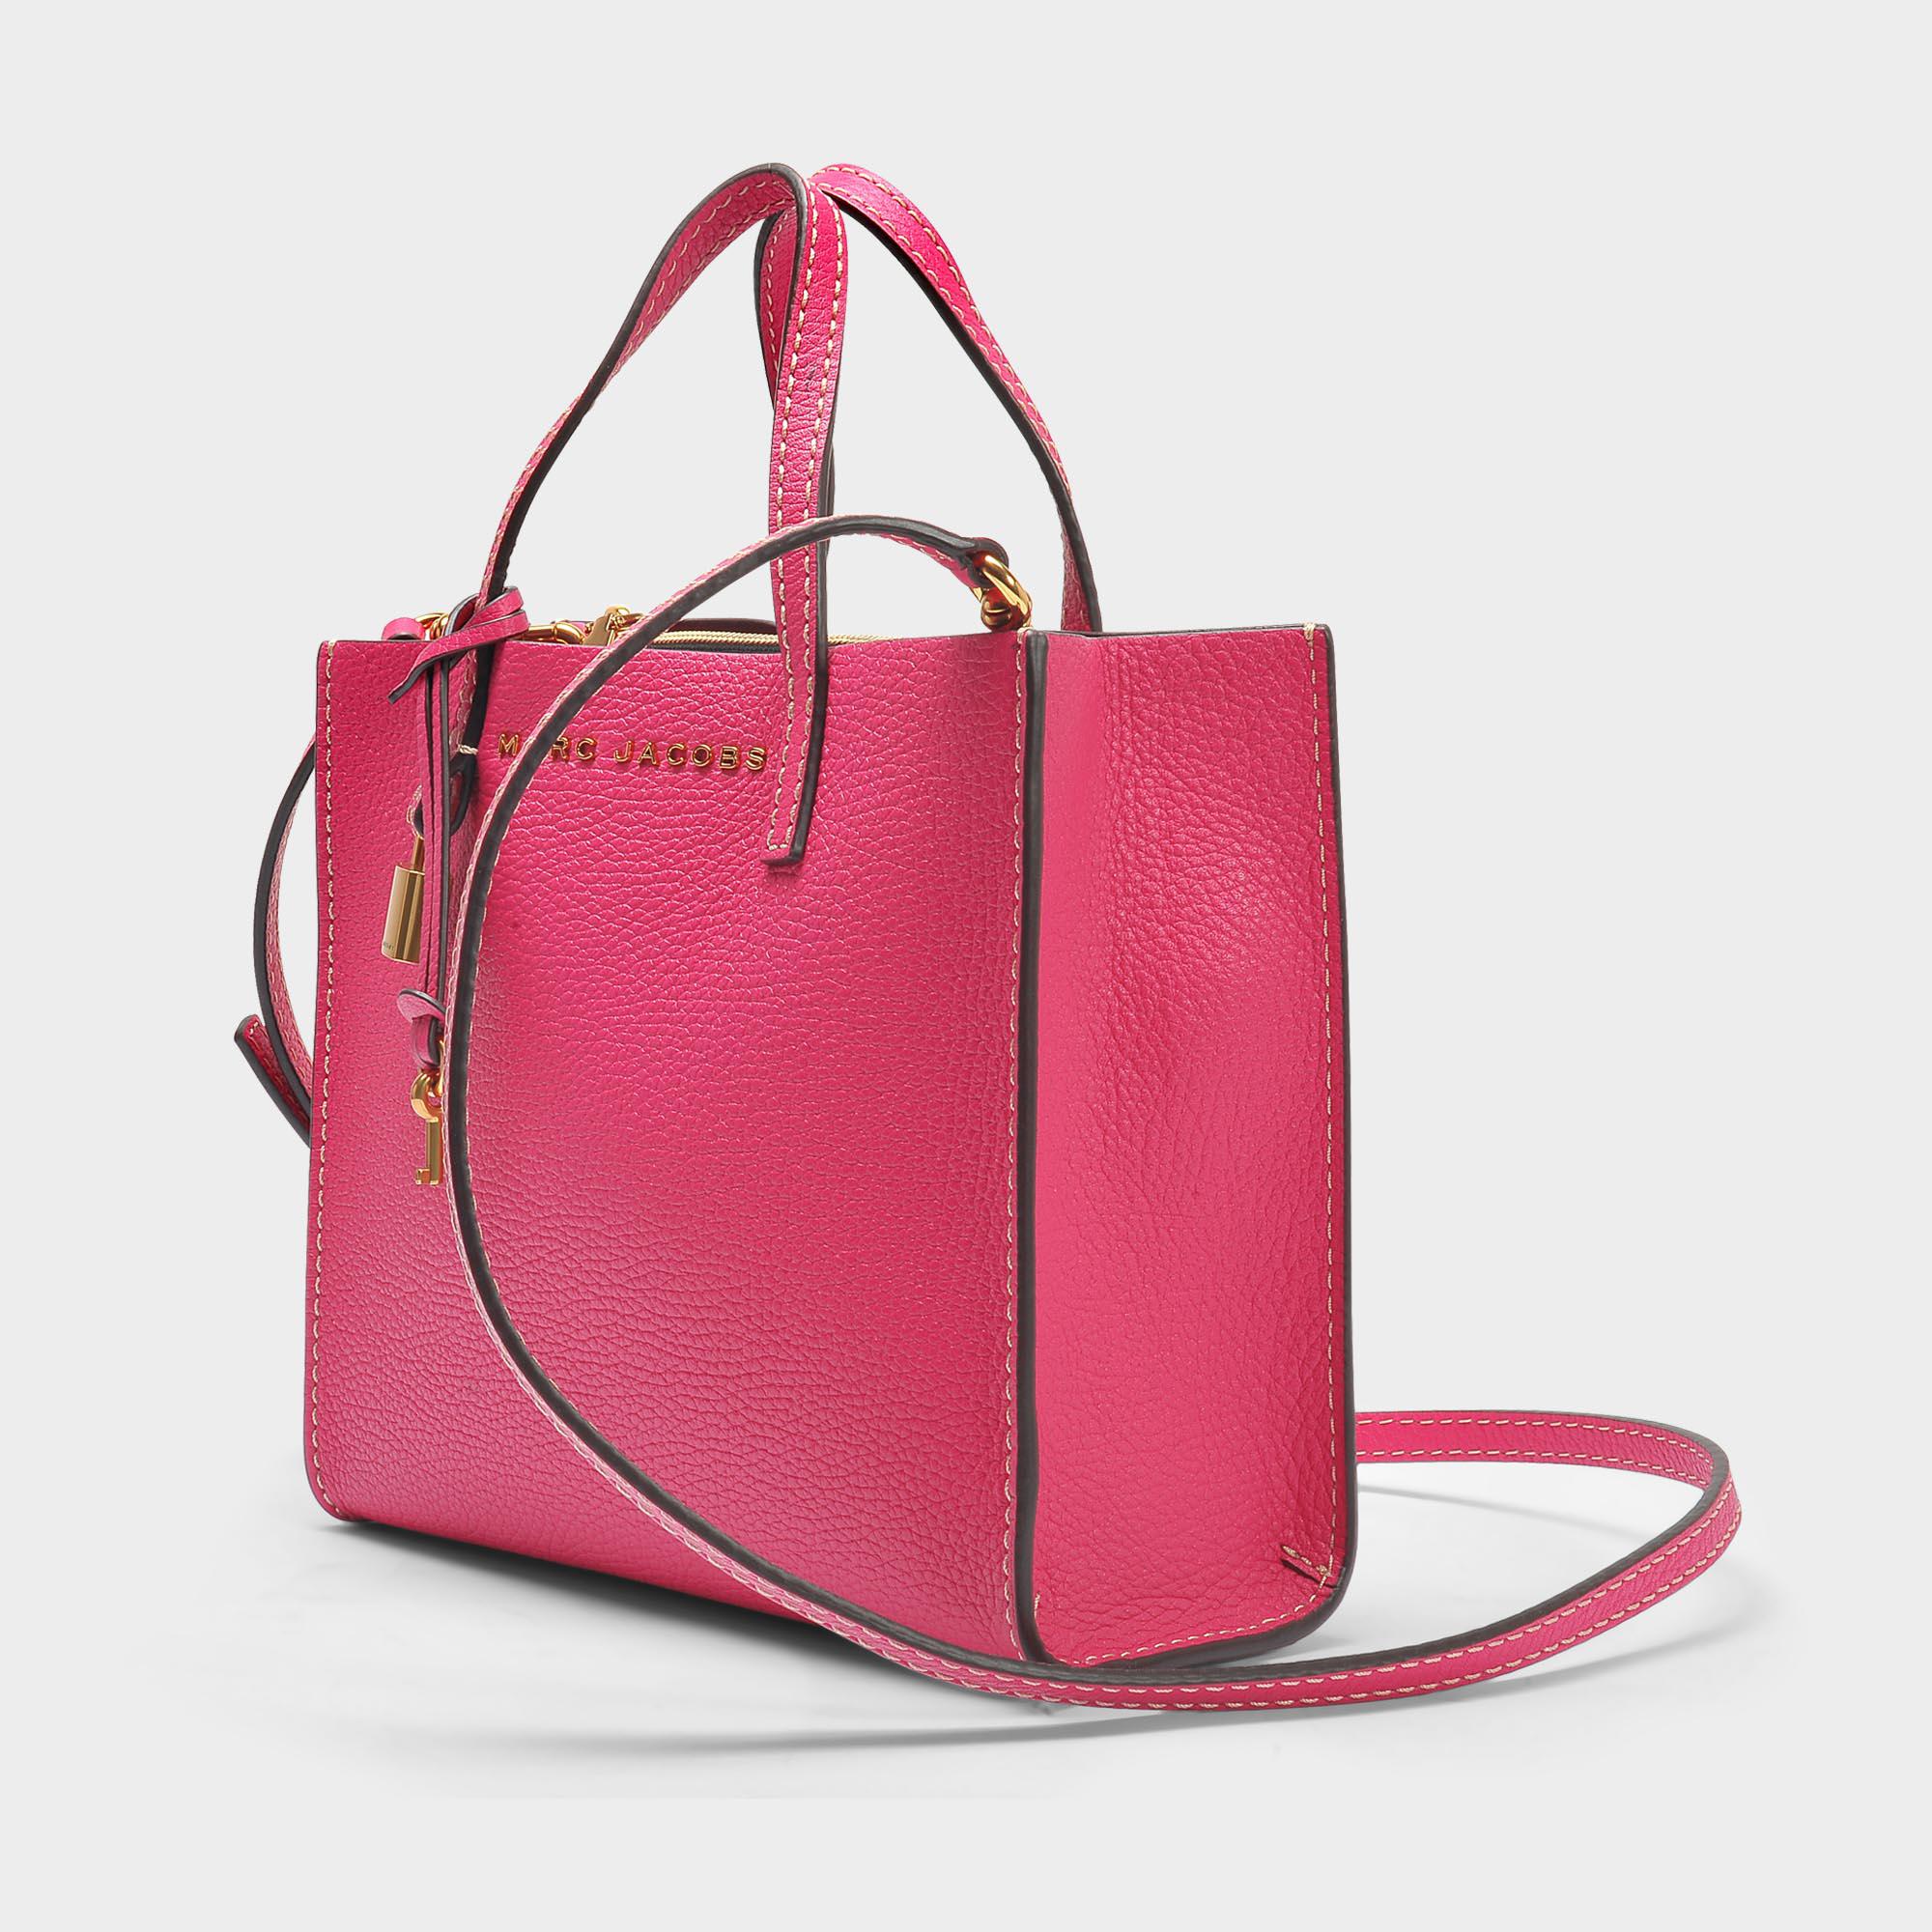 Marc Jacobs The Grind Mini Leather Tote Bag in Pink - Lyst